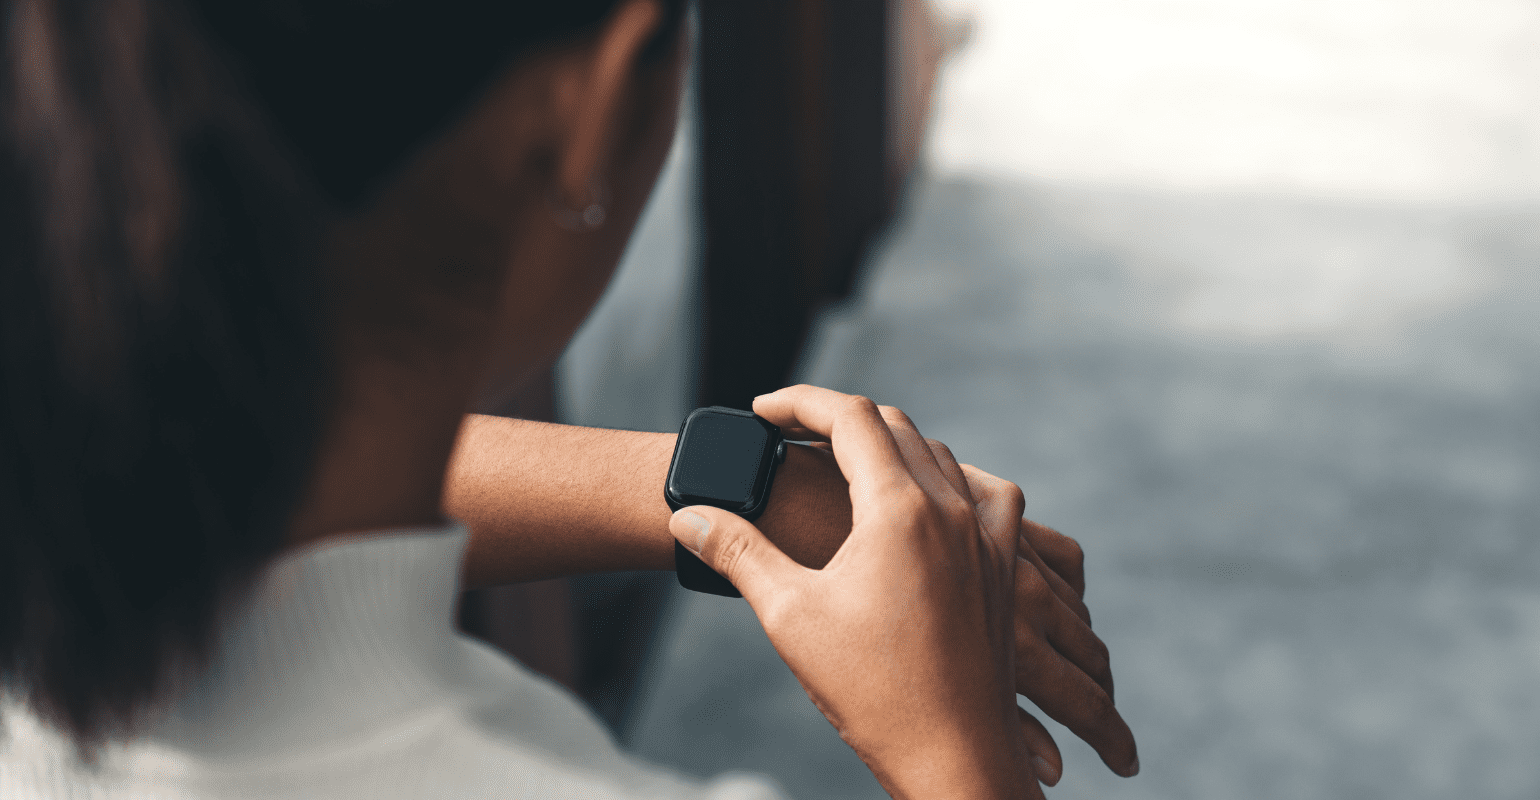 Digital wellness wearables evolve from trendy gadgets to integral part of healthcare